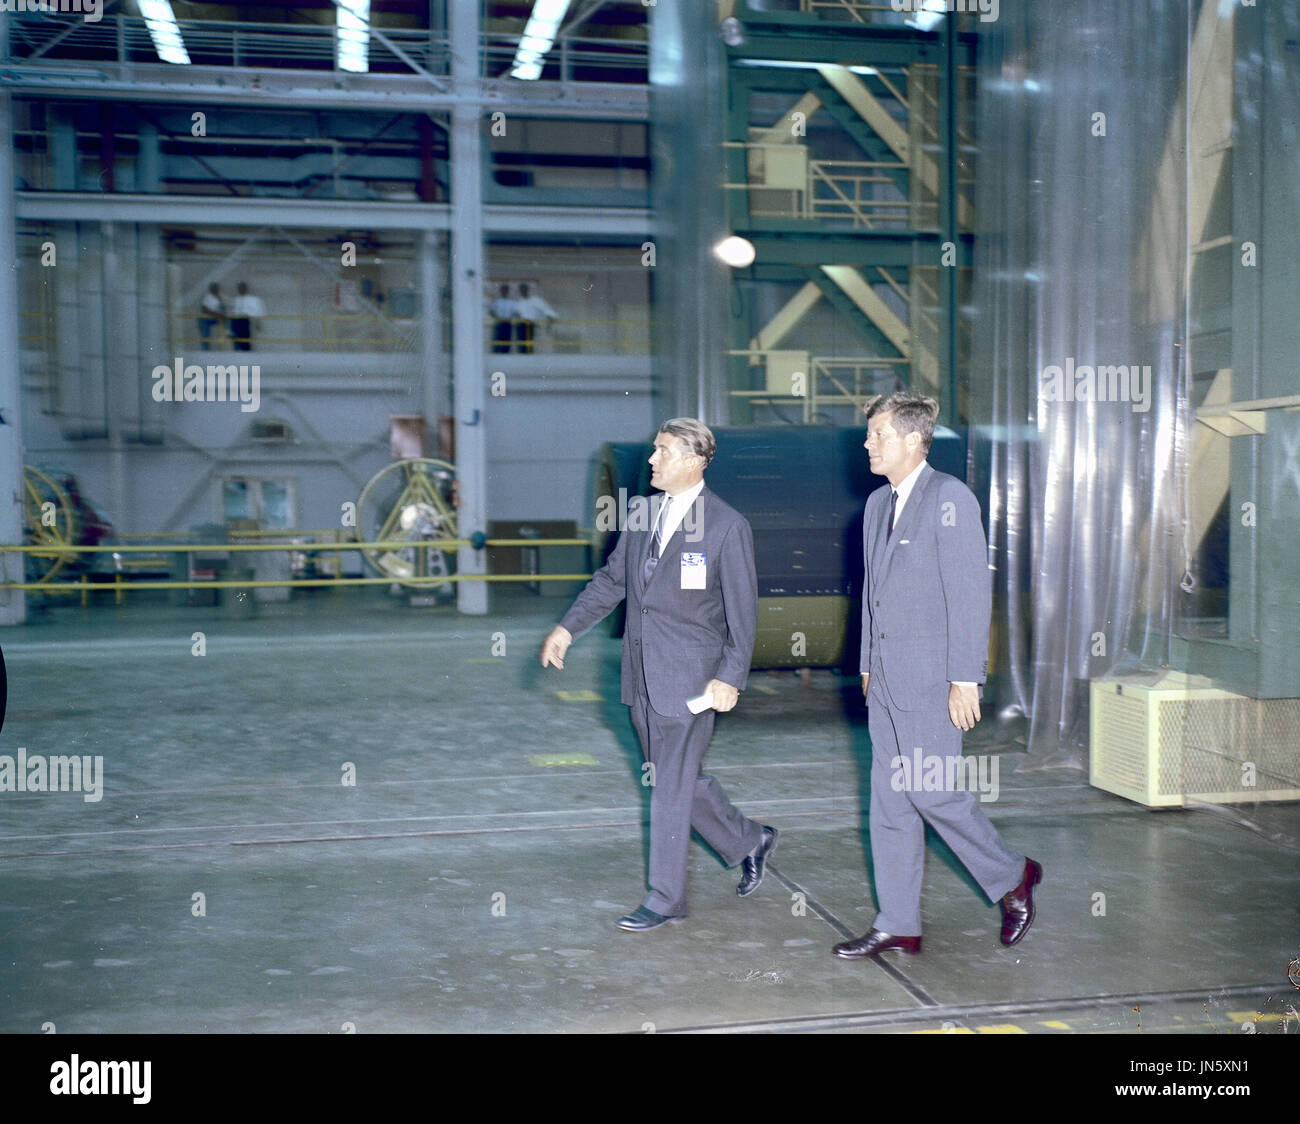 United States President John F. Kennedy visited Marshall Space Flight Center (MSFC) in Huntsville, Alabama on September 11, 1962. Here President Kennedy and Dr. Wernher von Braun, MSFC Director, tour one of the laboratories..Credit: NASA via CNP Stock Photo